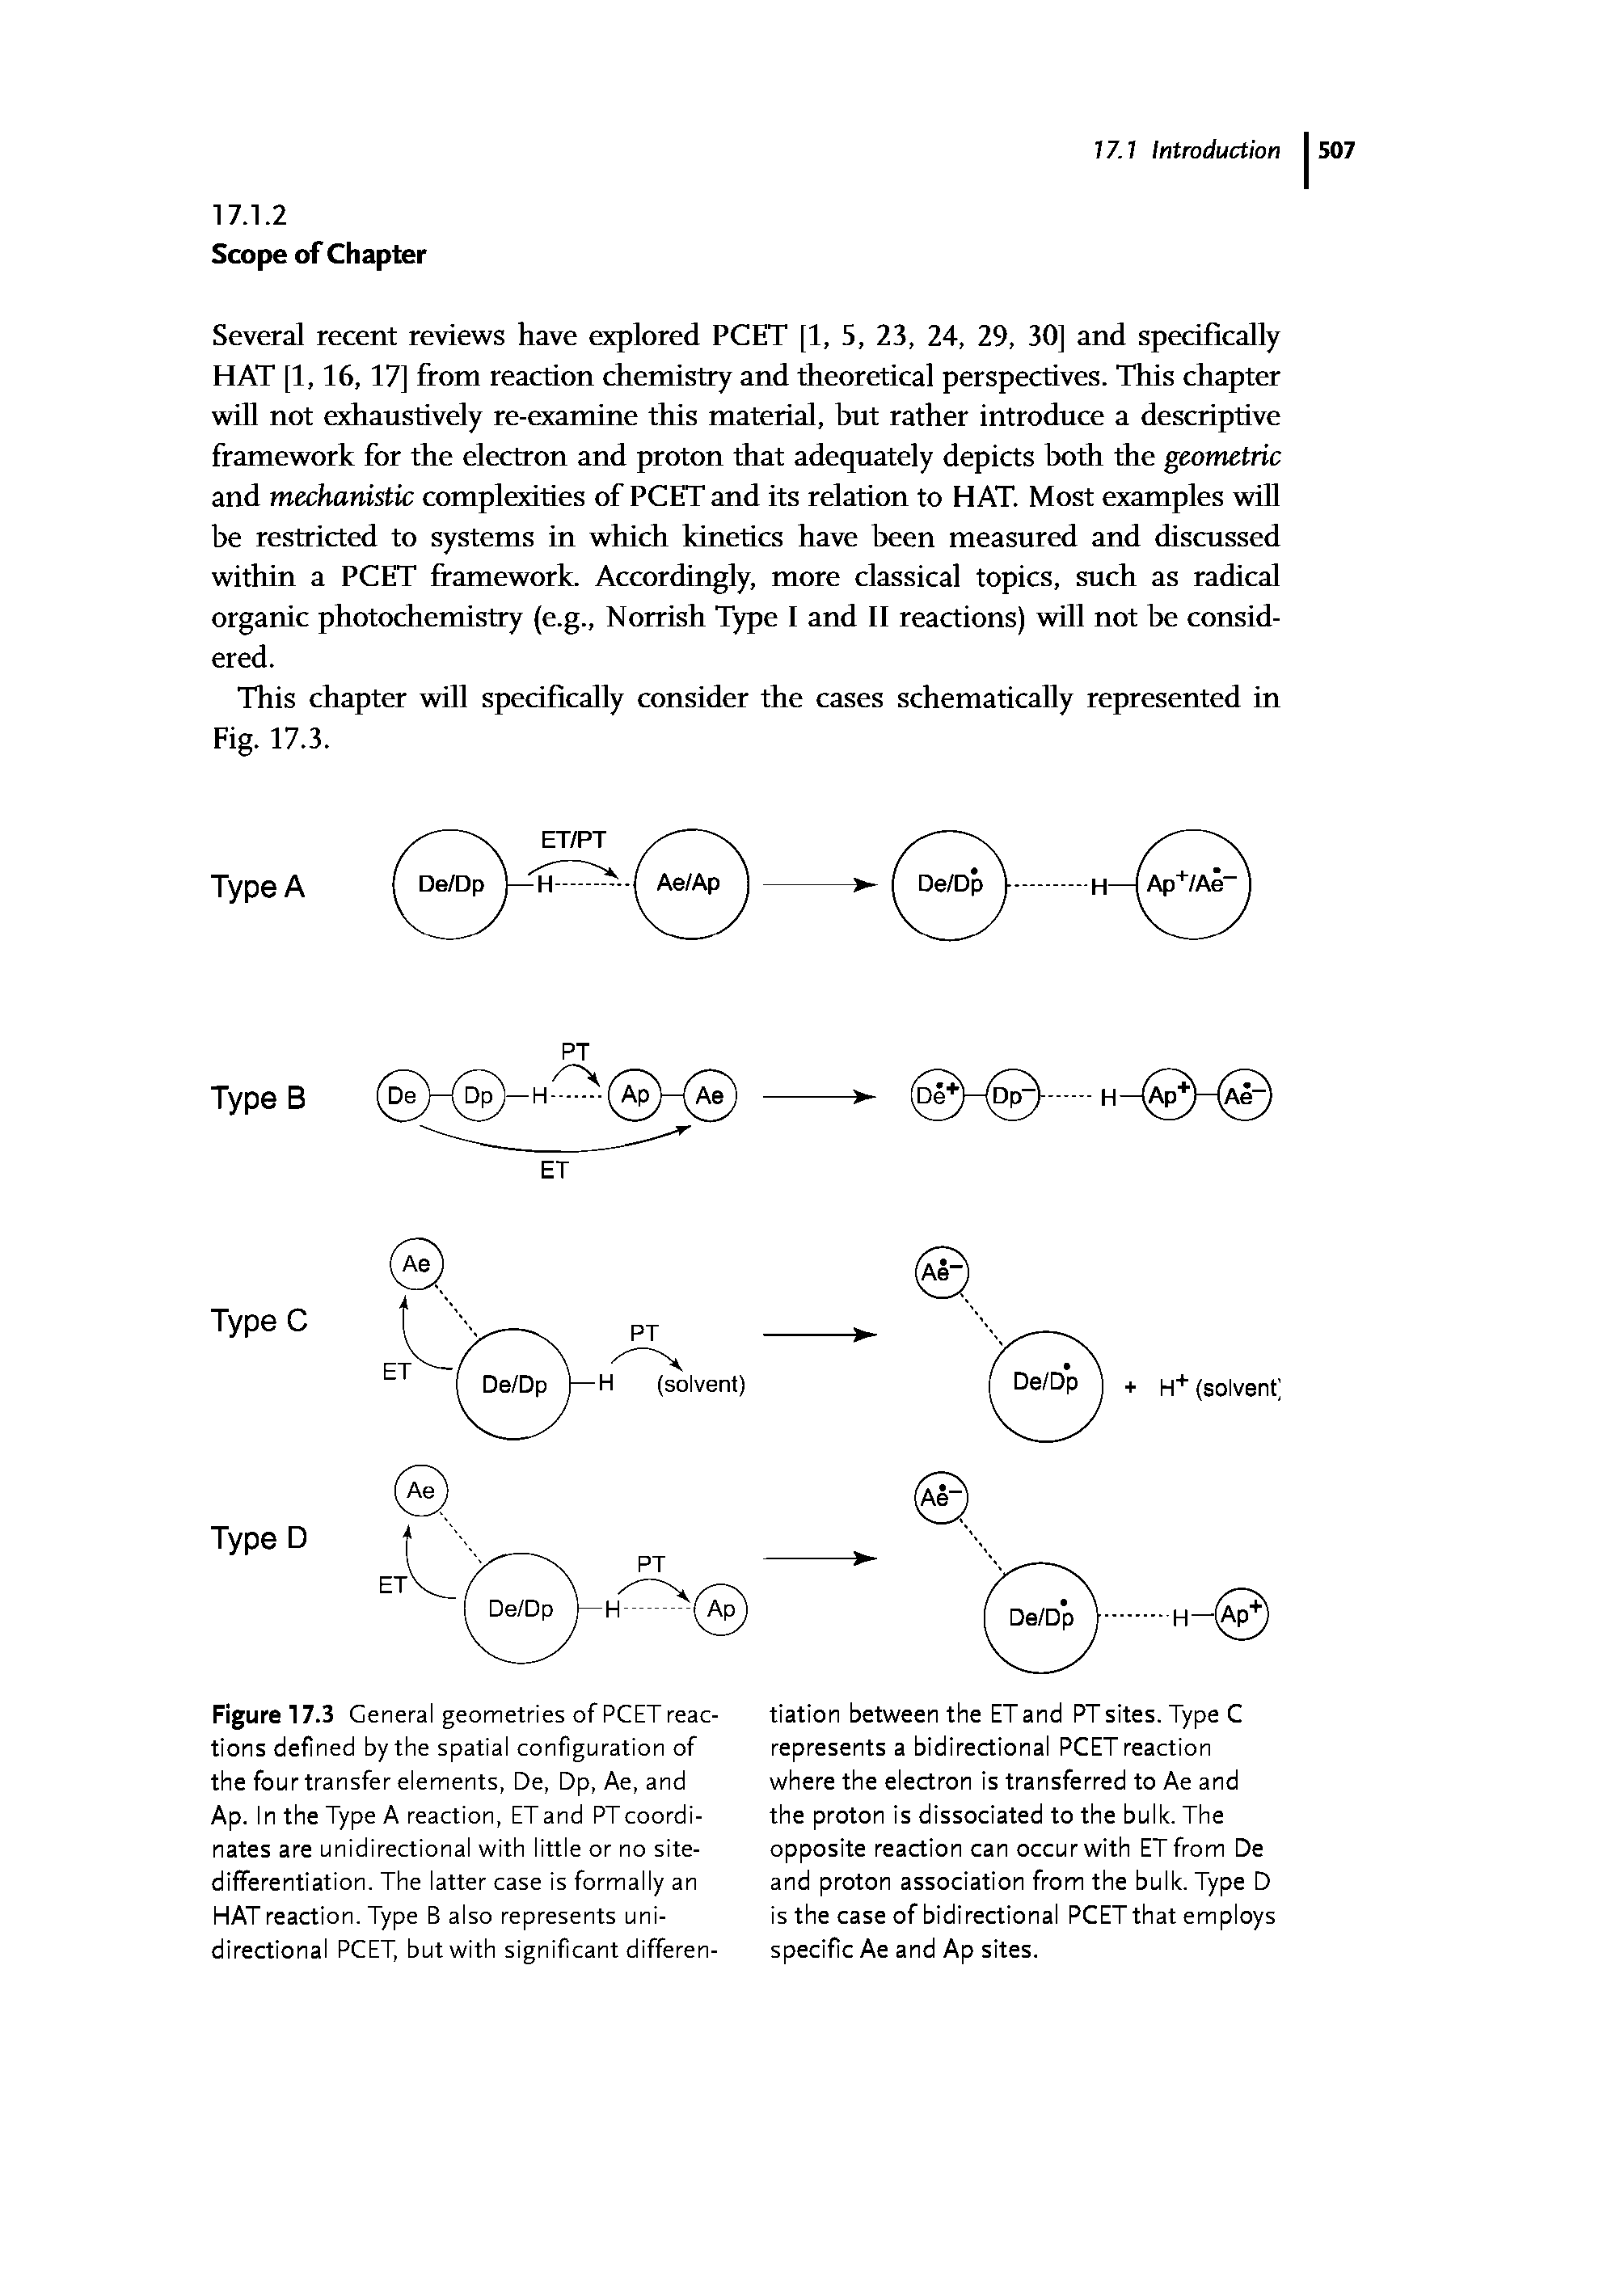 Figure 17.3 General geometries of PCET reactions defined by the spatial configuration of the four transfer elements, De, Dp, Ae, and Ap. In the Type A reaction, ET and PT coordinates are unidirectional with little or no site-differentiation. The latter case is formally an HAT reaction. Type B also represents unidirectional PCET, but with significant differen-...